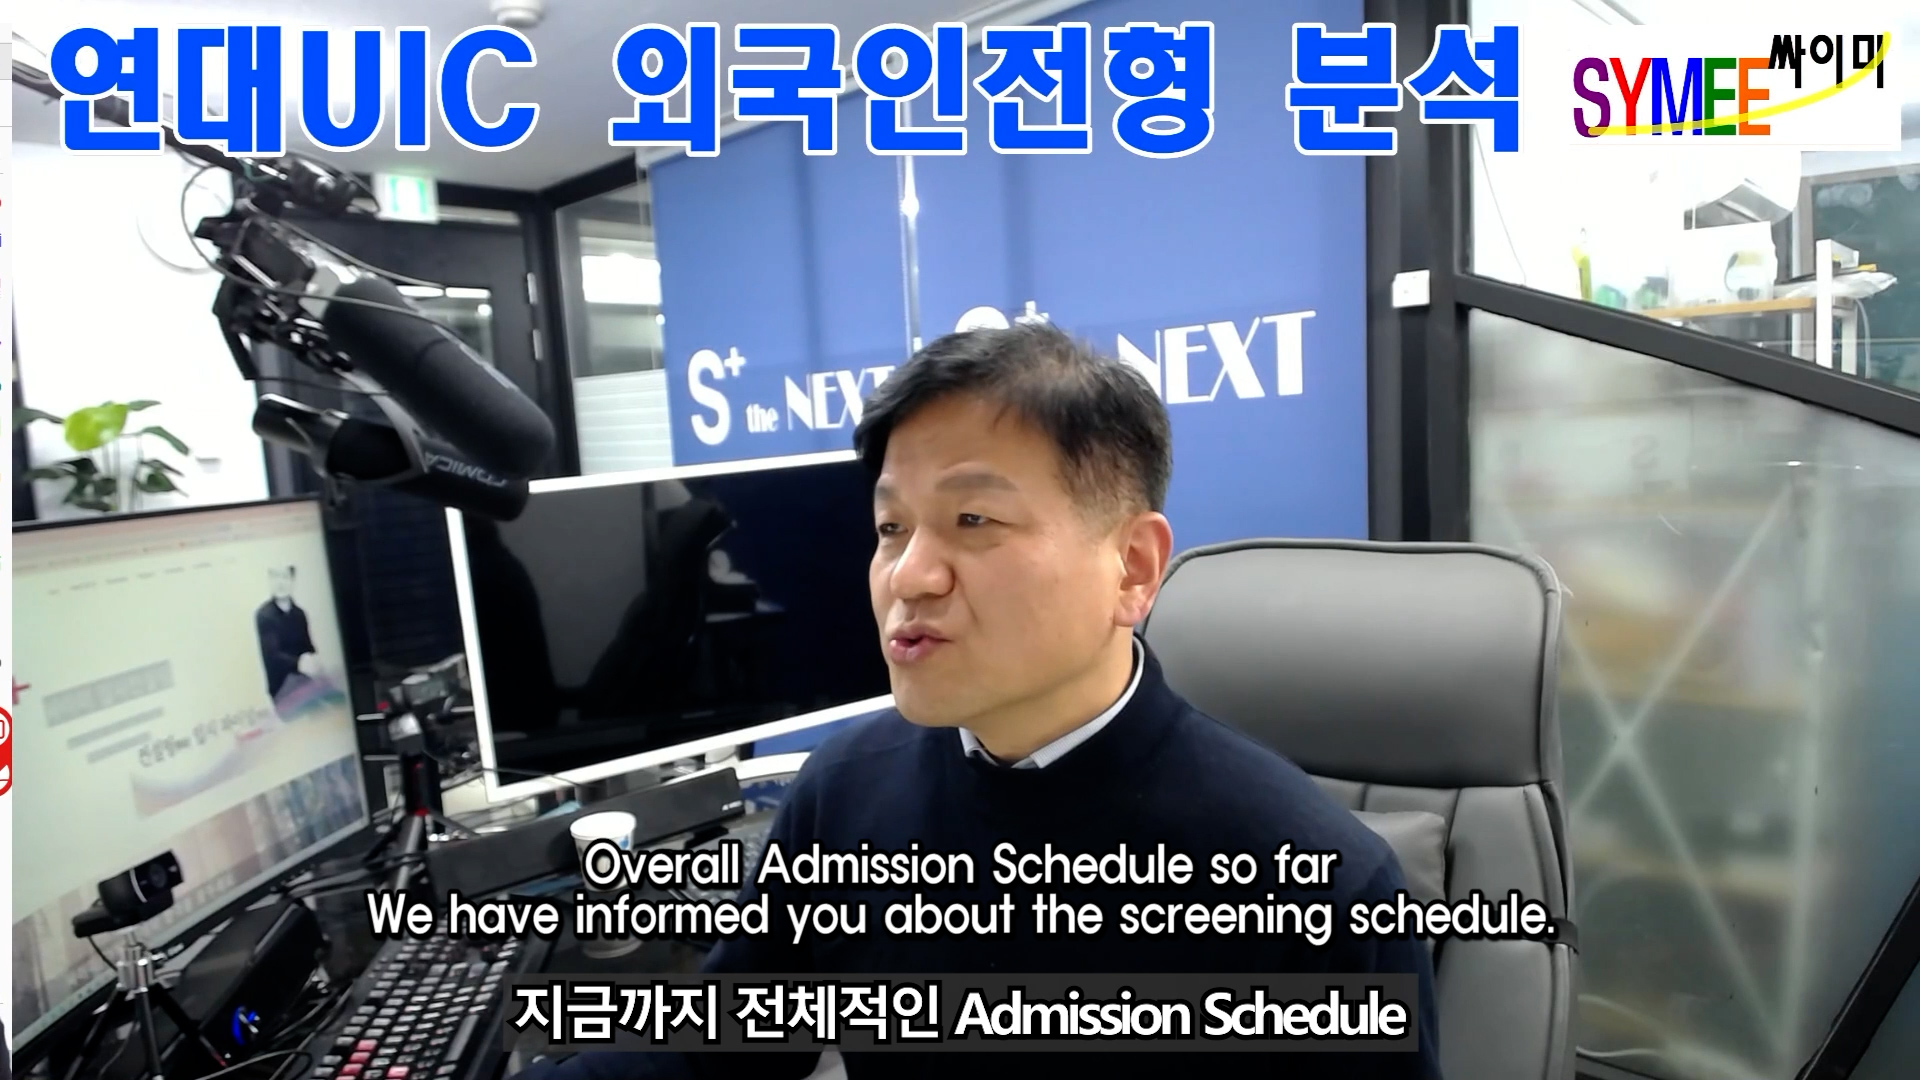 Yonsei Univ. Admission for UIC for Foreign Student 03 Admission Procedure.00_03_51_56.스틸 007.jpg